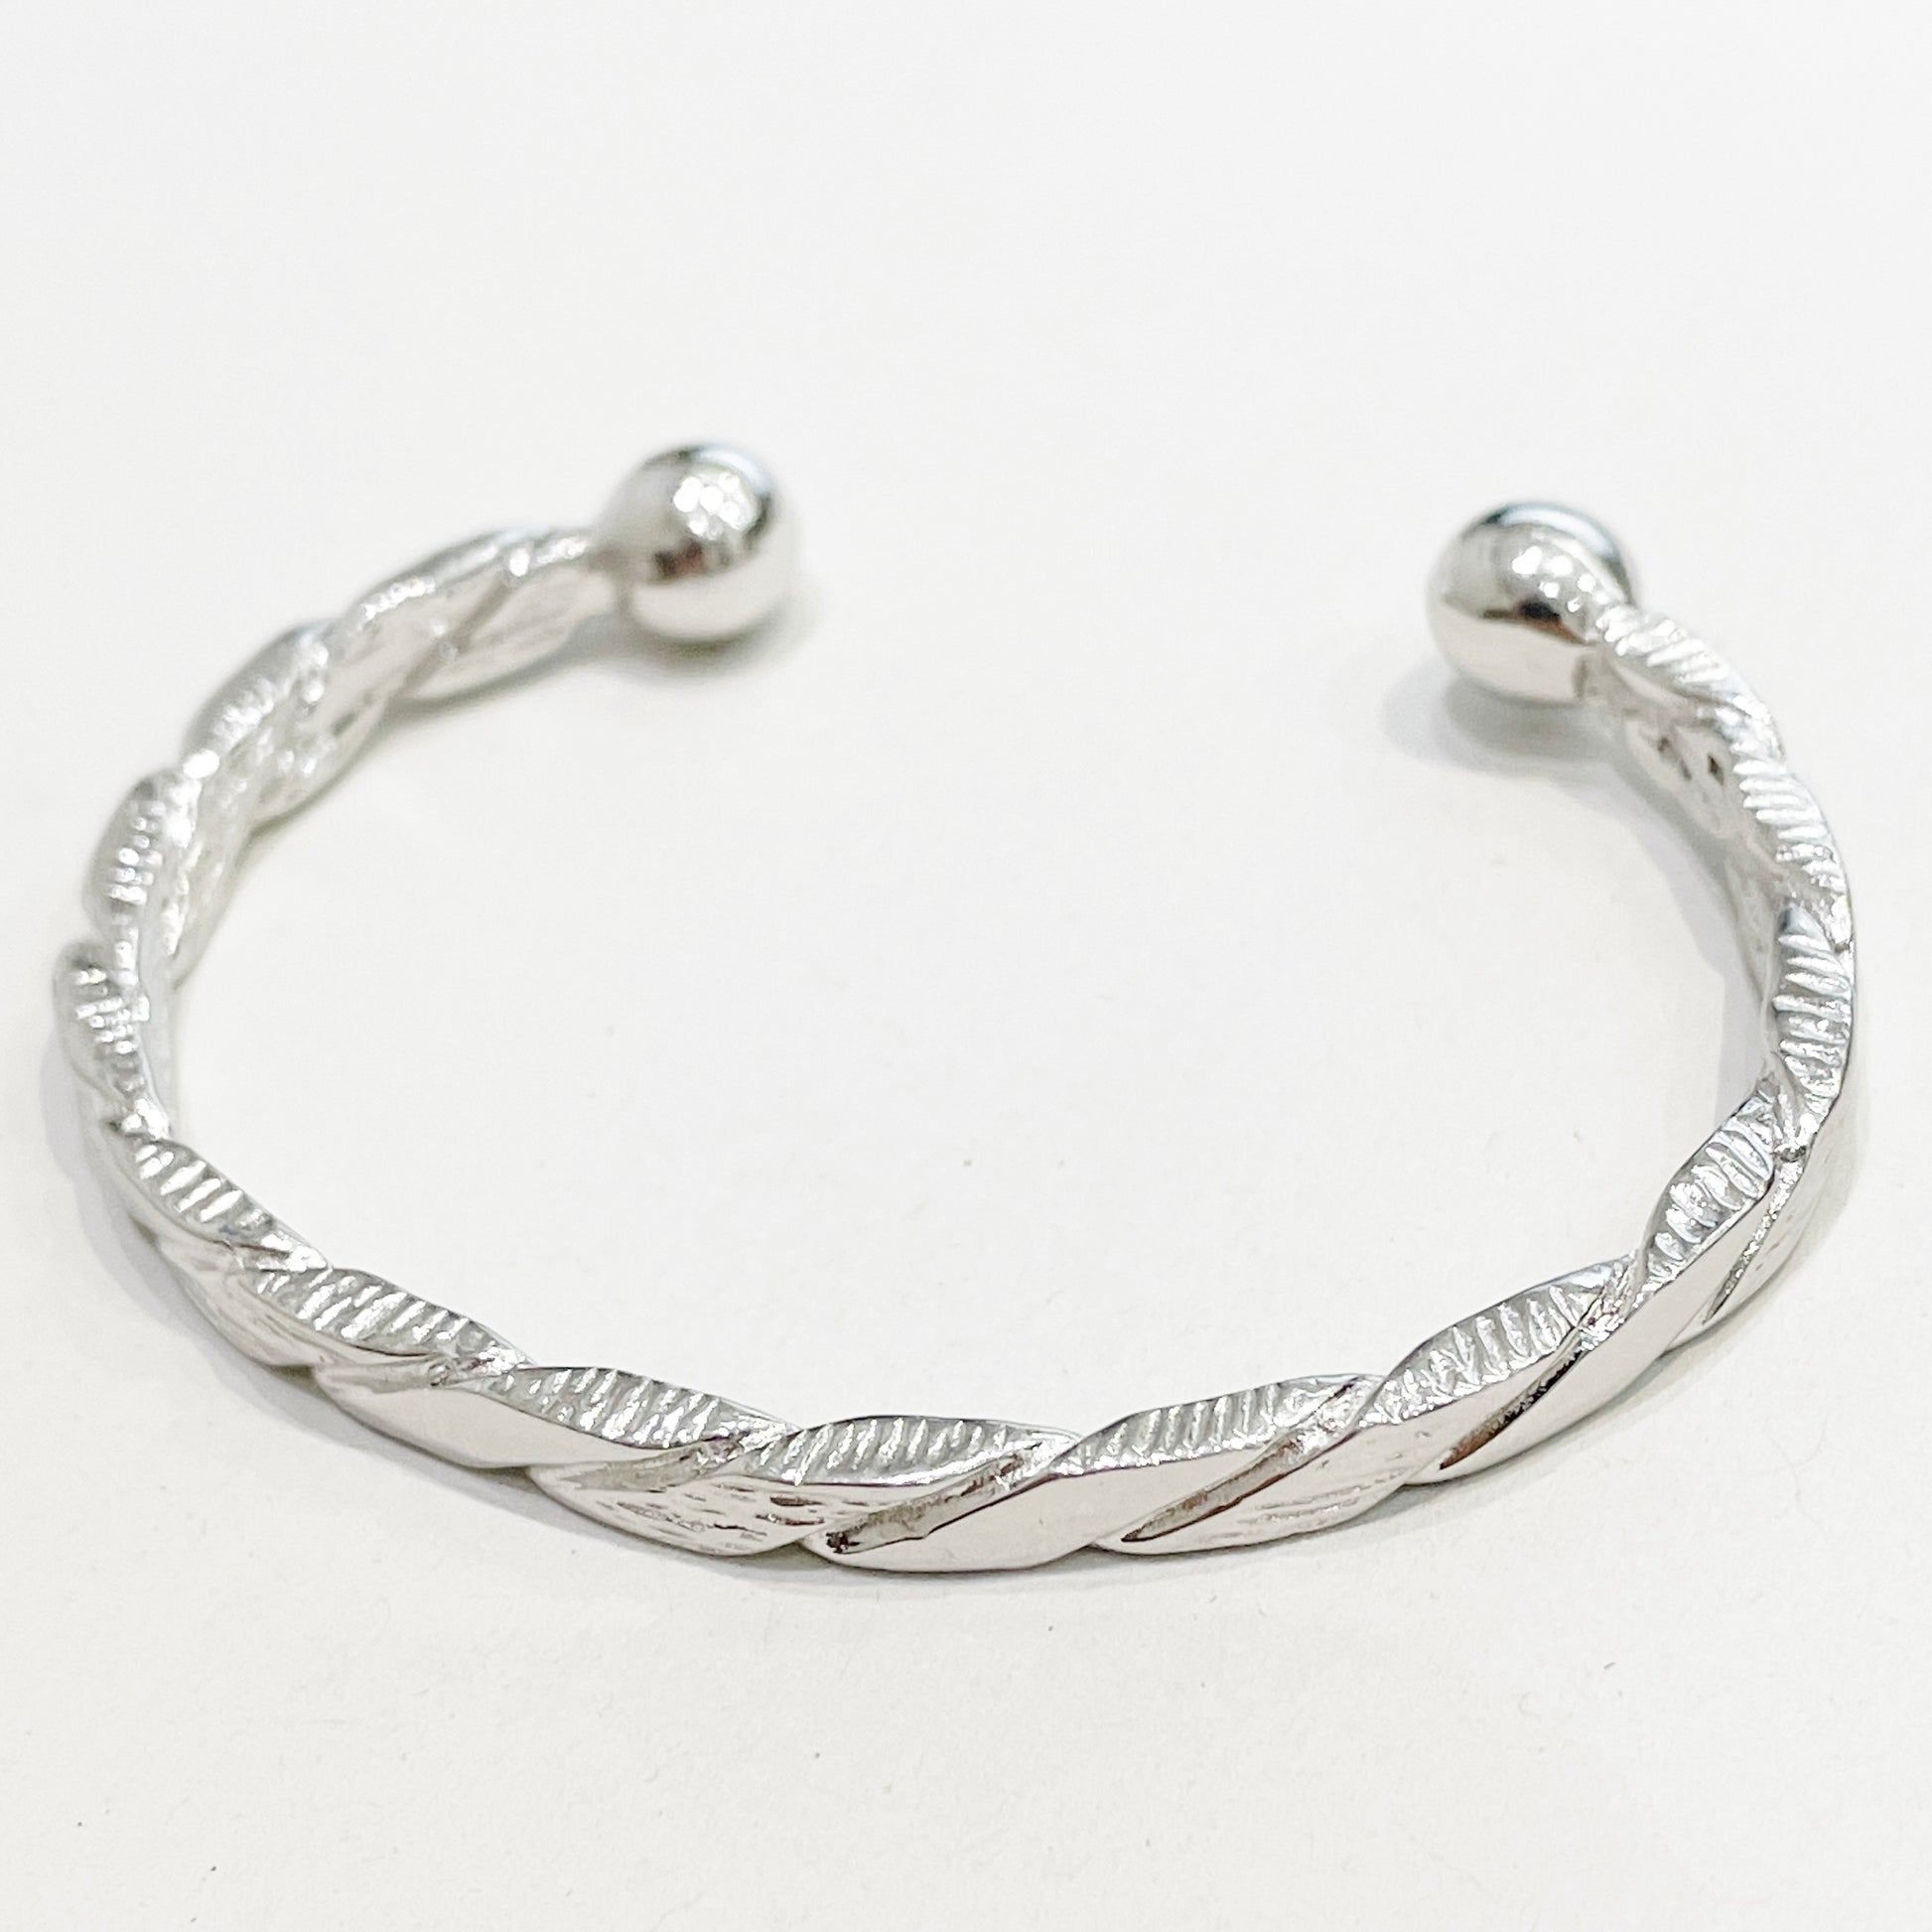 Childs torque bangle twisted patterned solid sterling silver